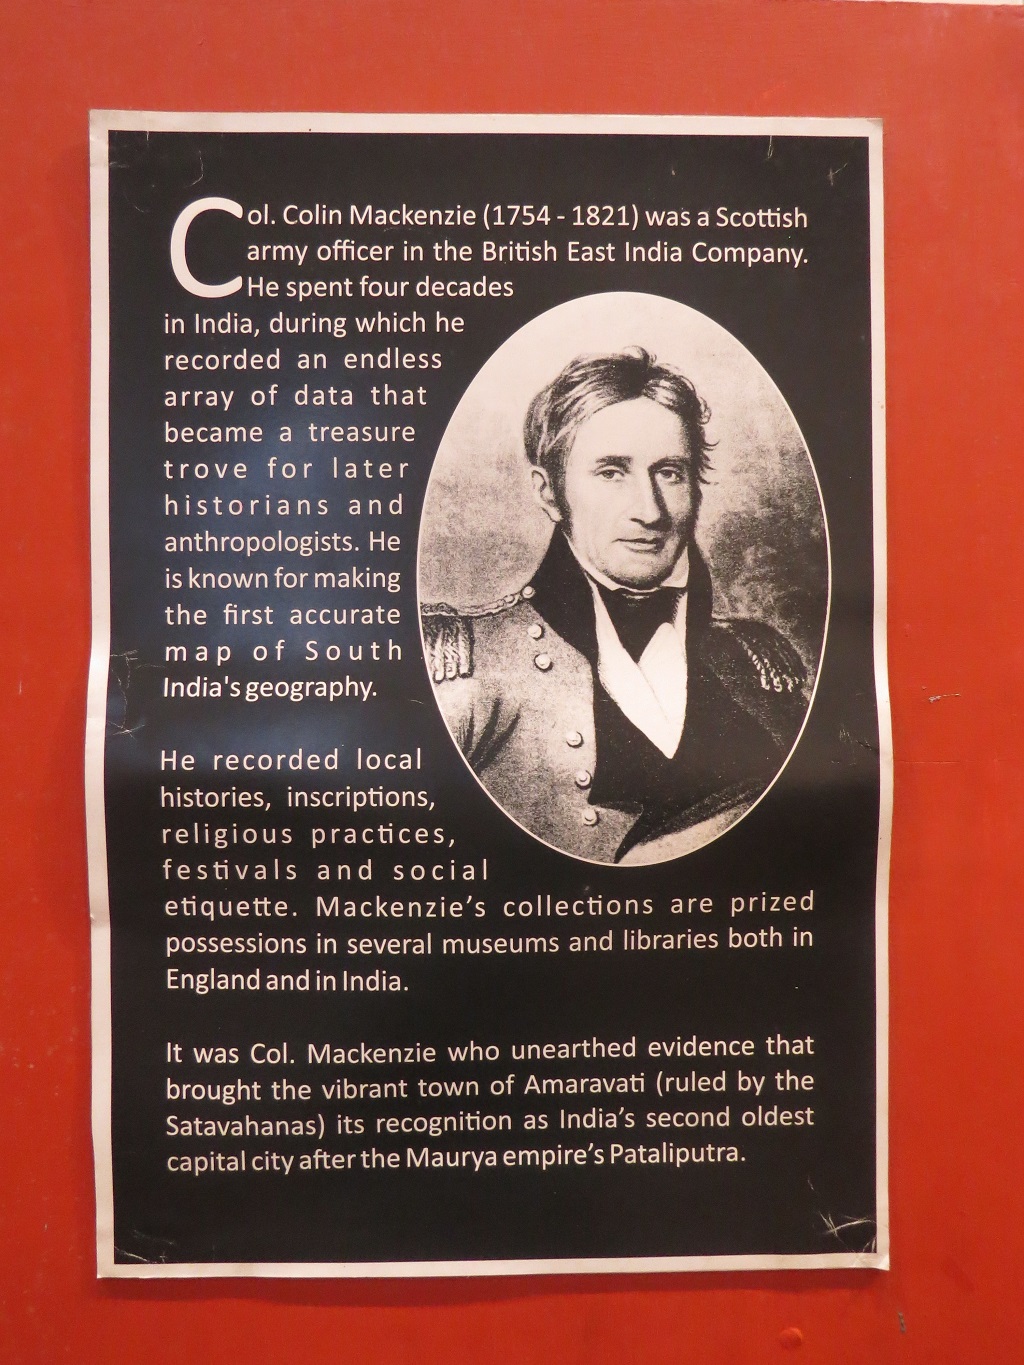 About: Col. Colin Mackenzie (1754-1821)